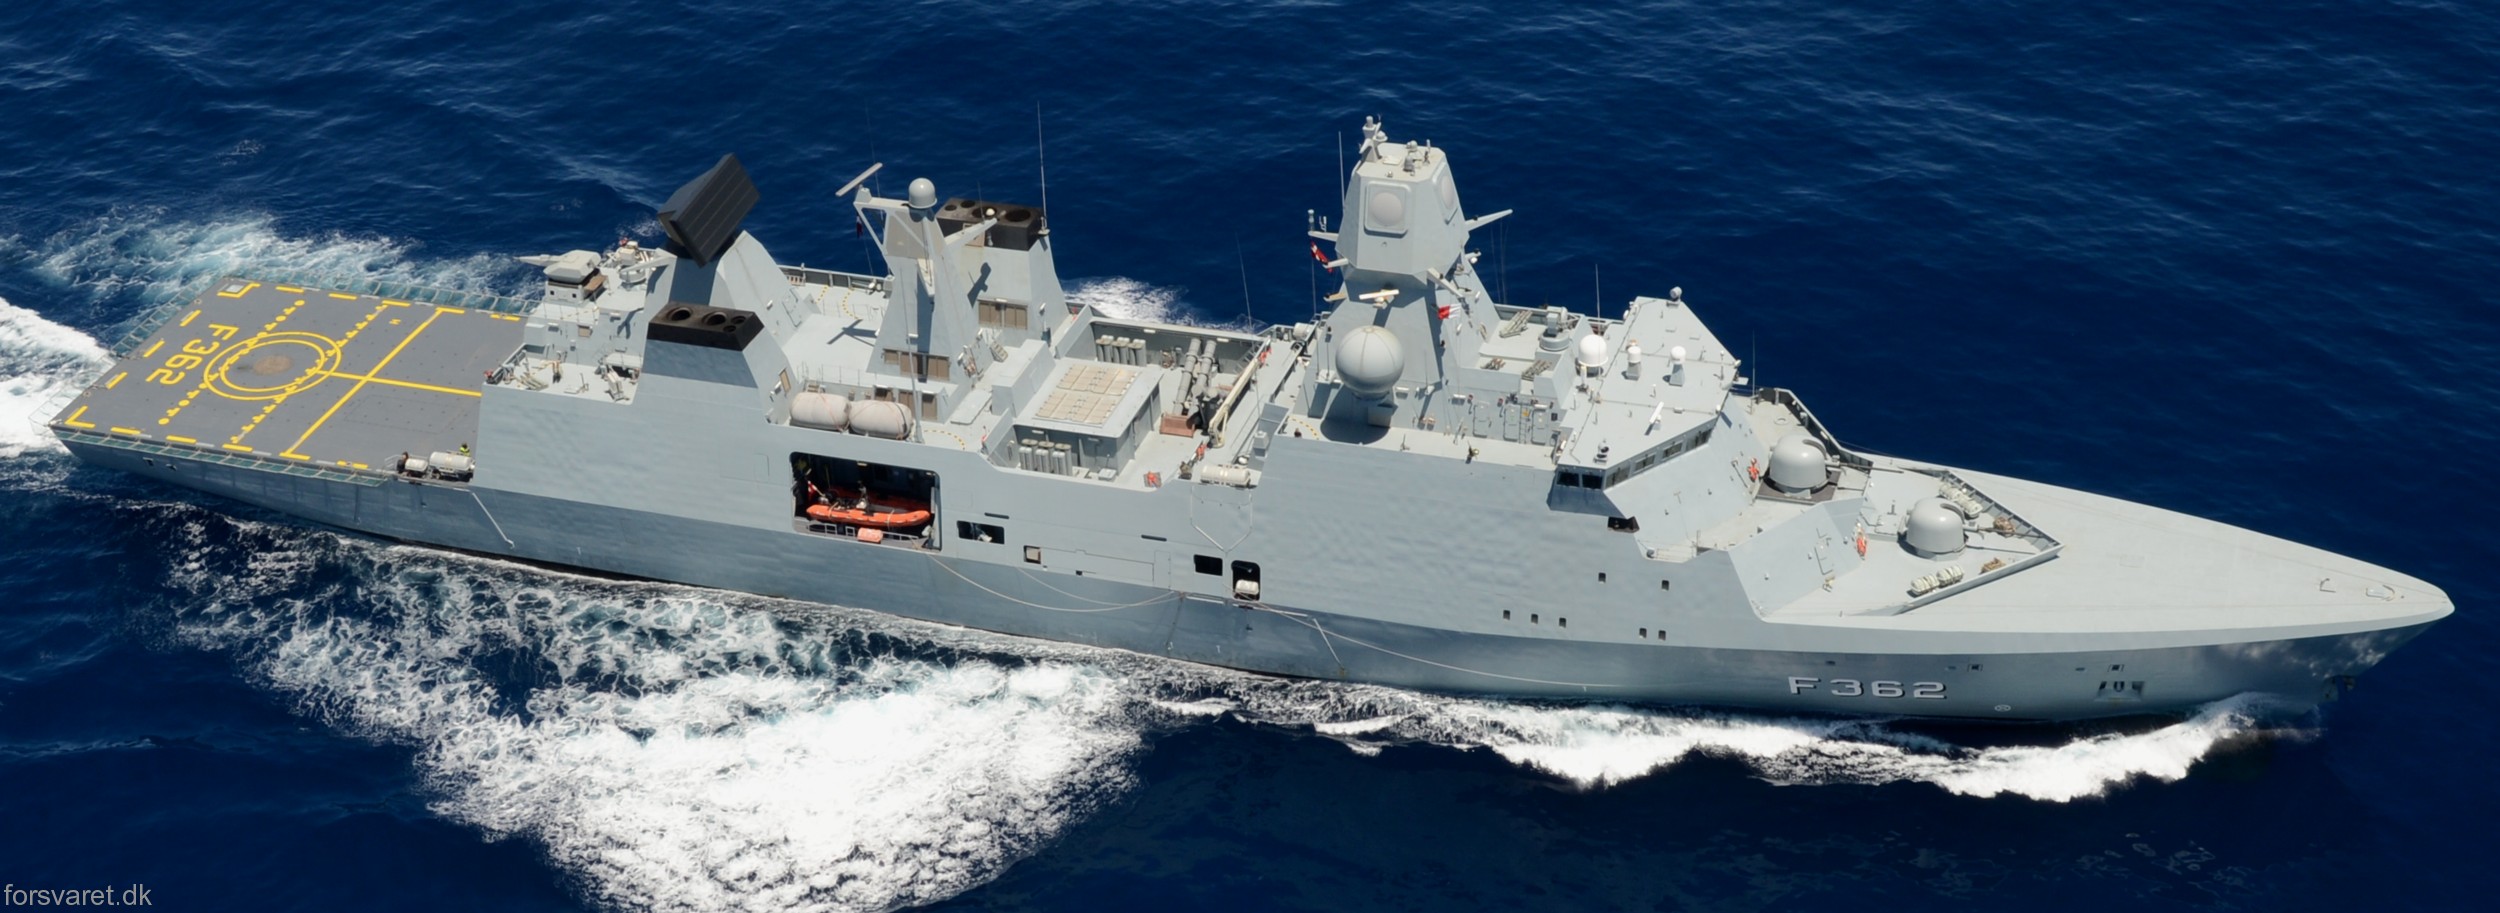 f-362 hdms peter willemoes iver huitfeldt class guided missile frigate ffg royal danish navy 51